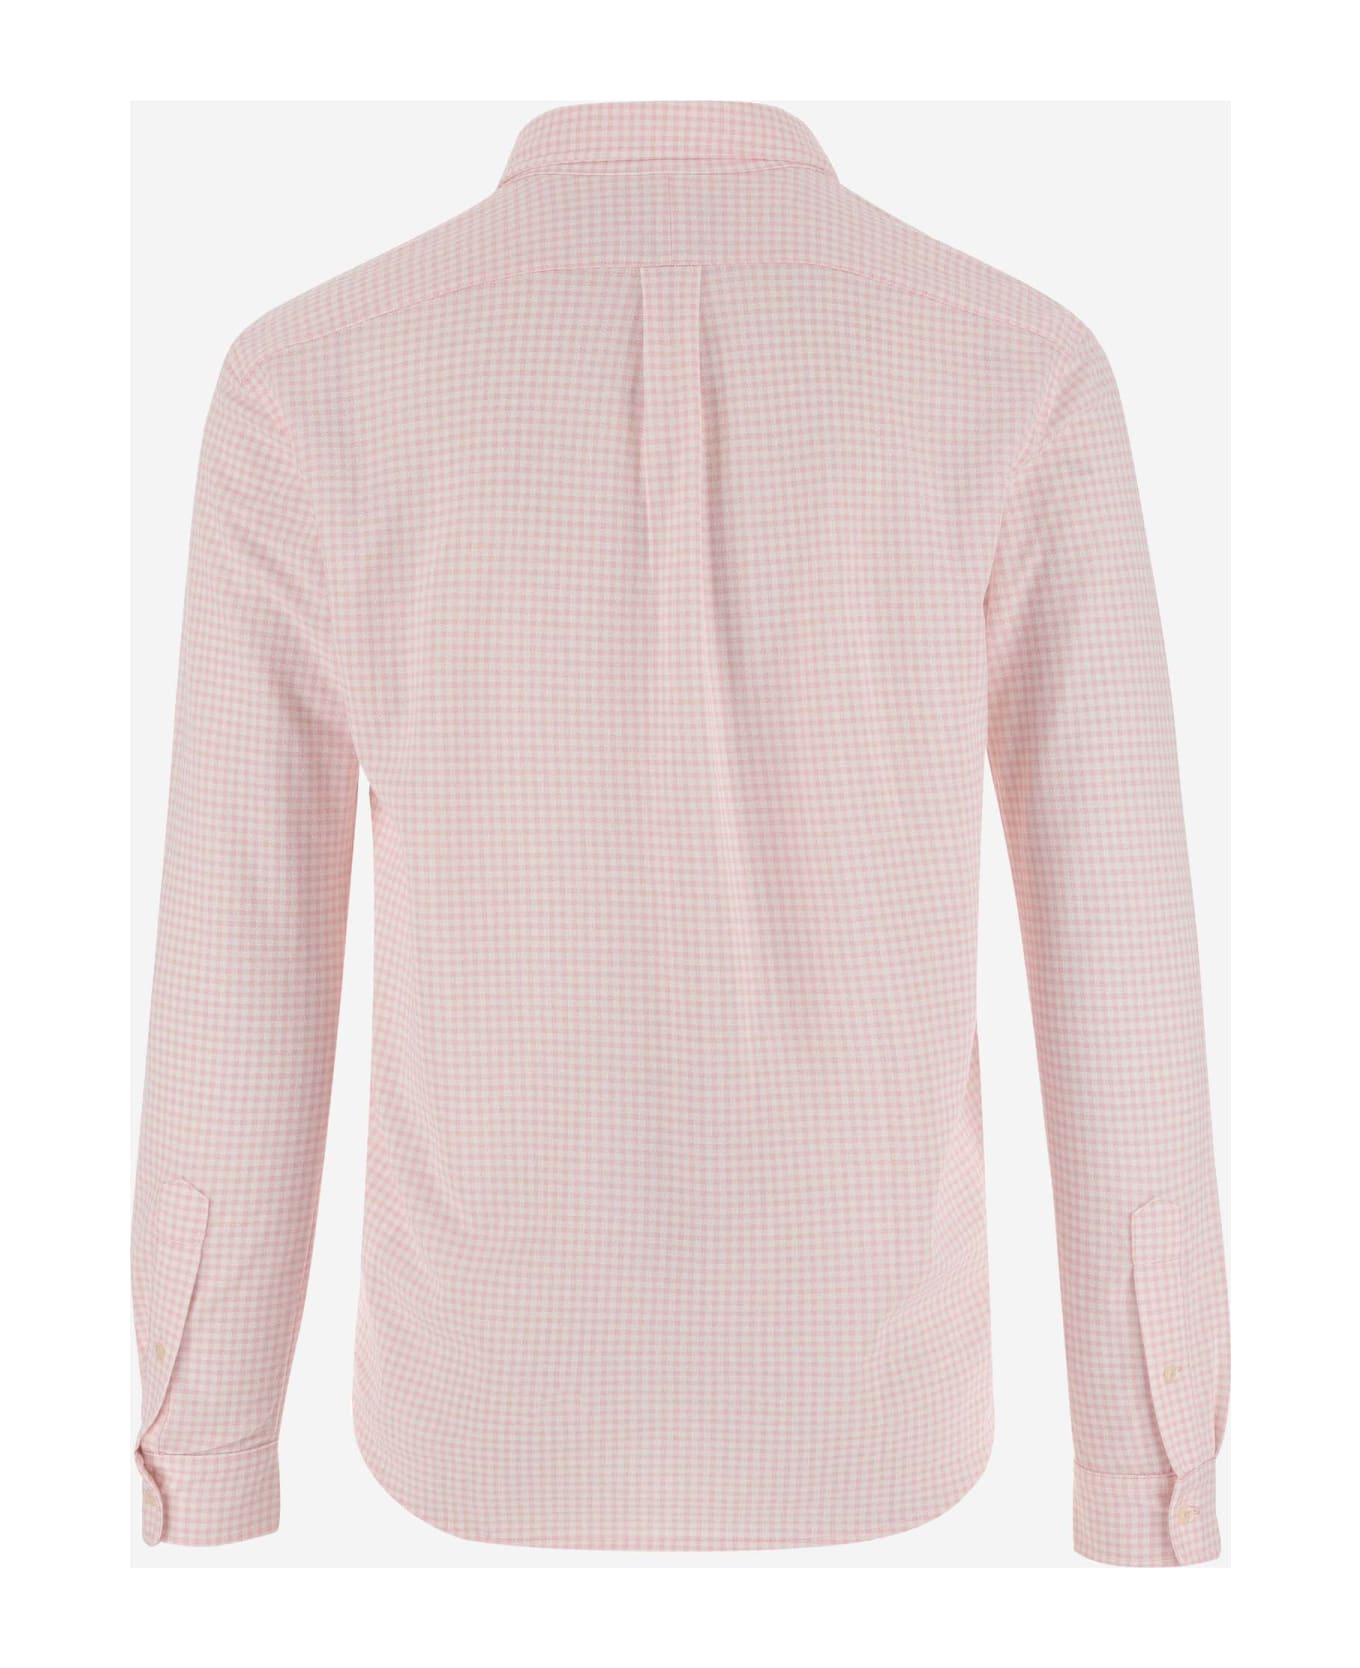 Polo Ralph Lauren Cotton Shirt With Check Pattern - Pink